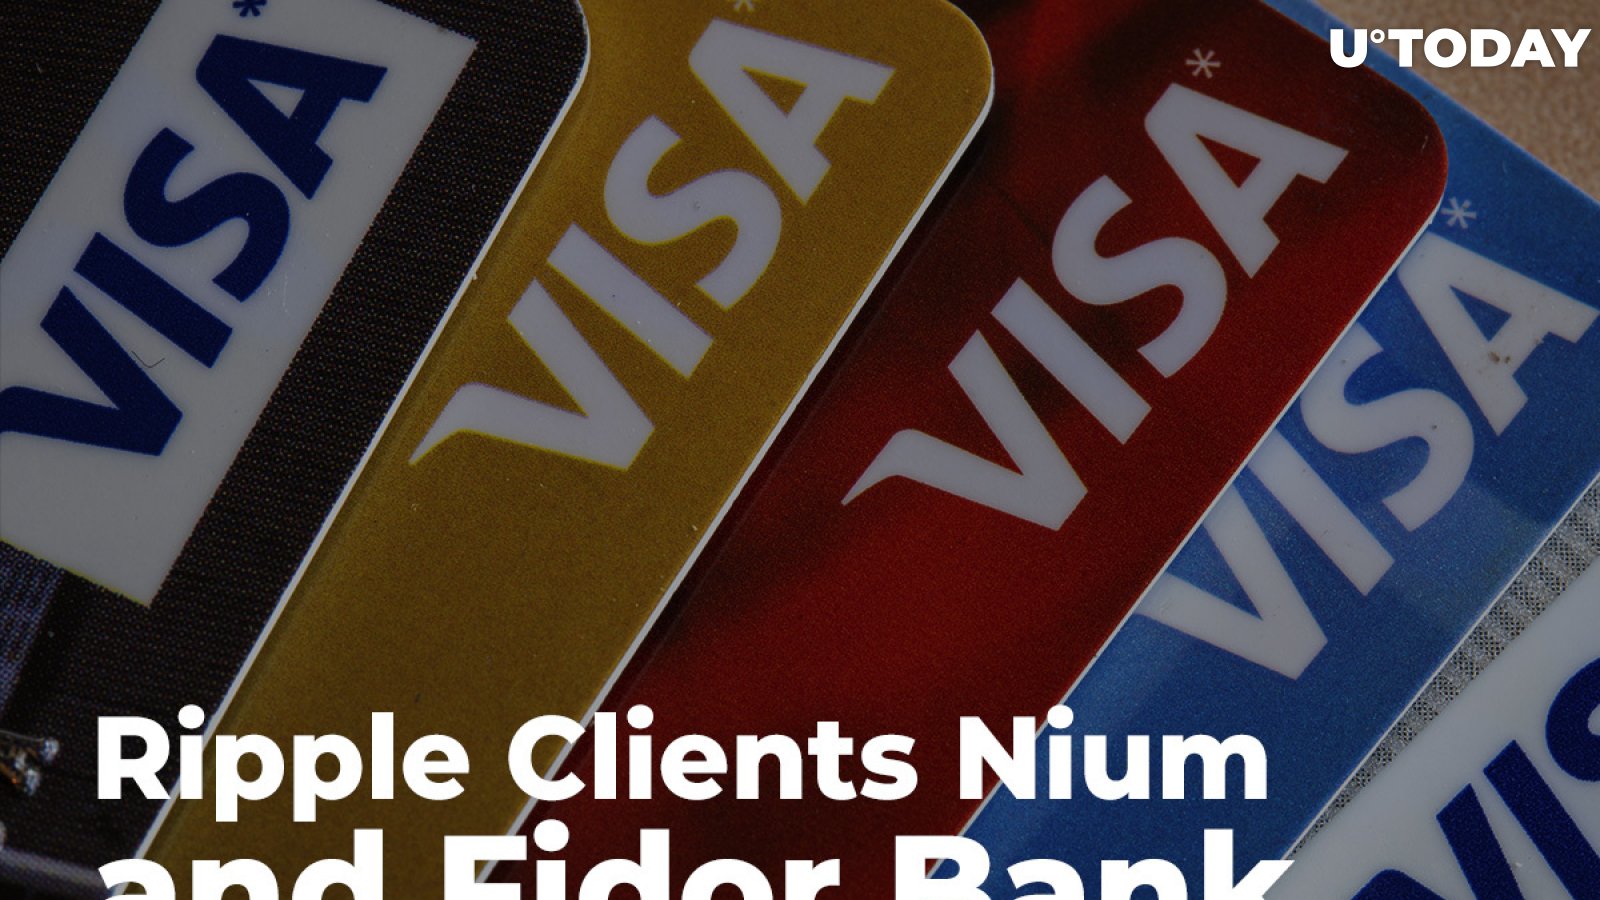 Ripple Clients Nium and Fidor Bank Partner with Visa and PayDo App to Set Up Better Payment Systems